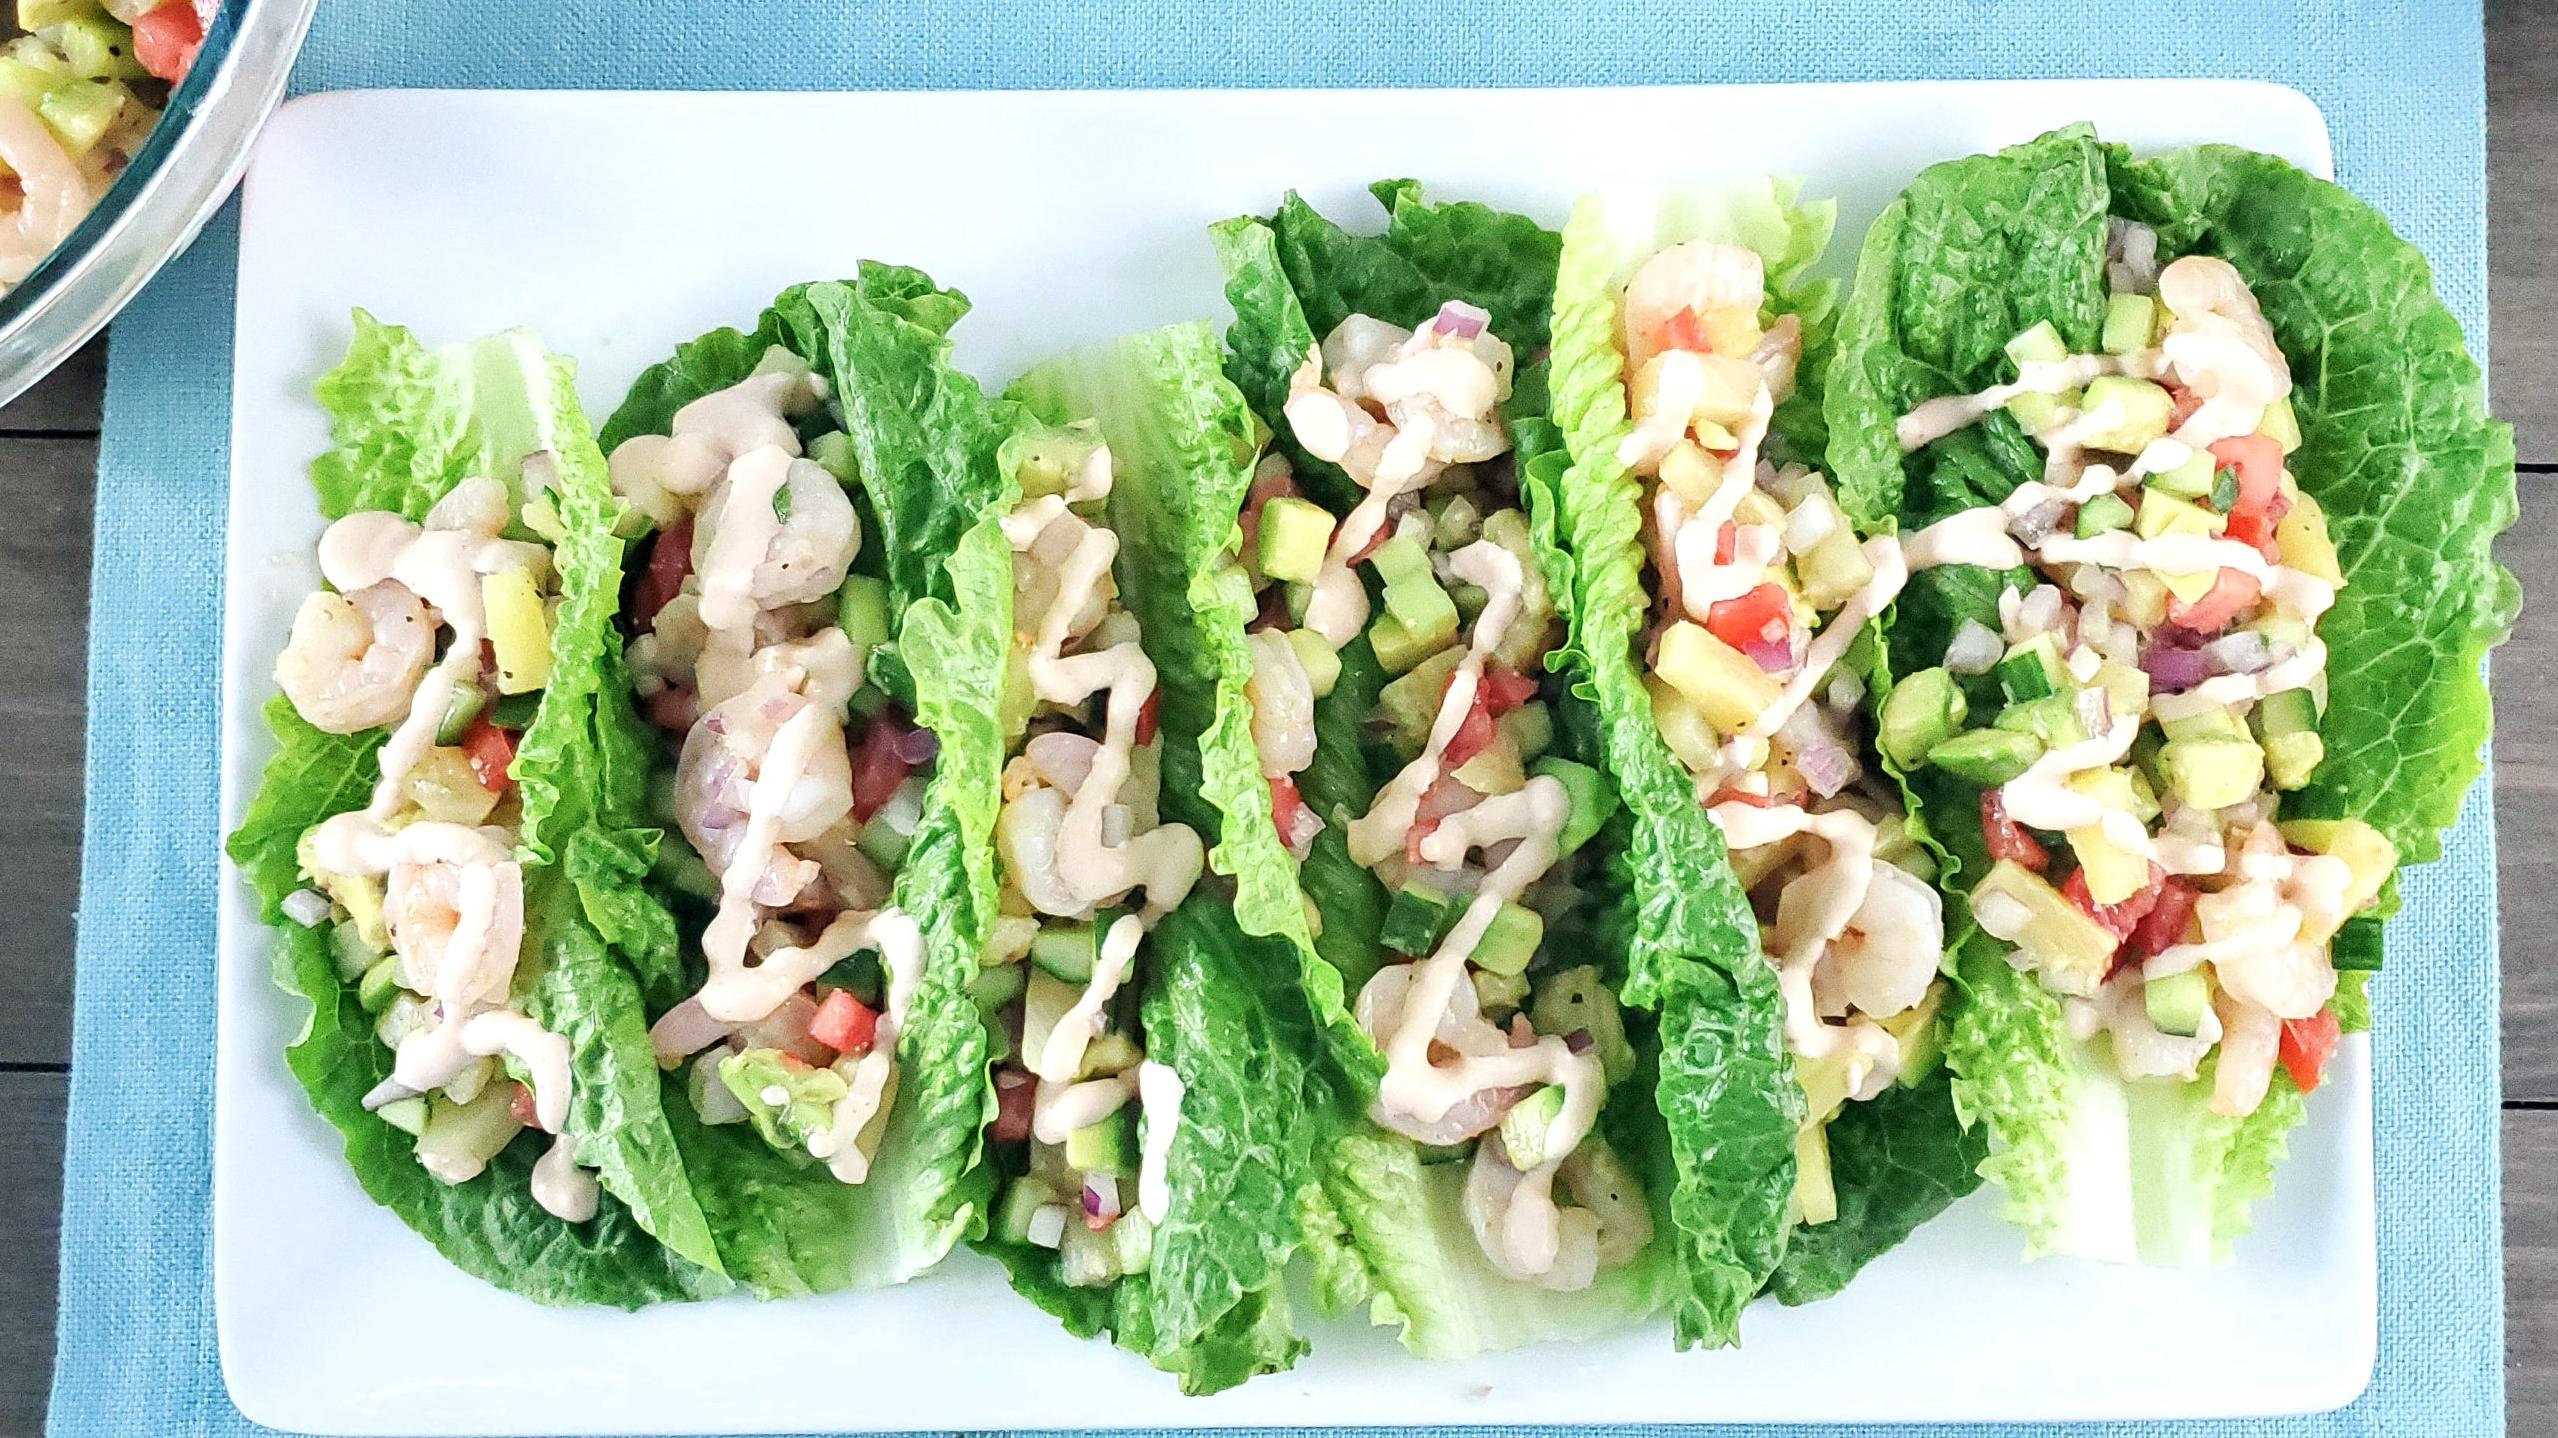  Looking for a light yet filling snack? These lettuce wraps are the answer!